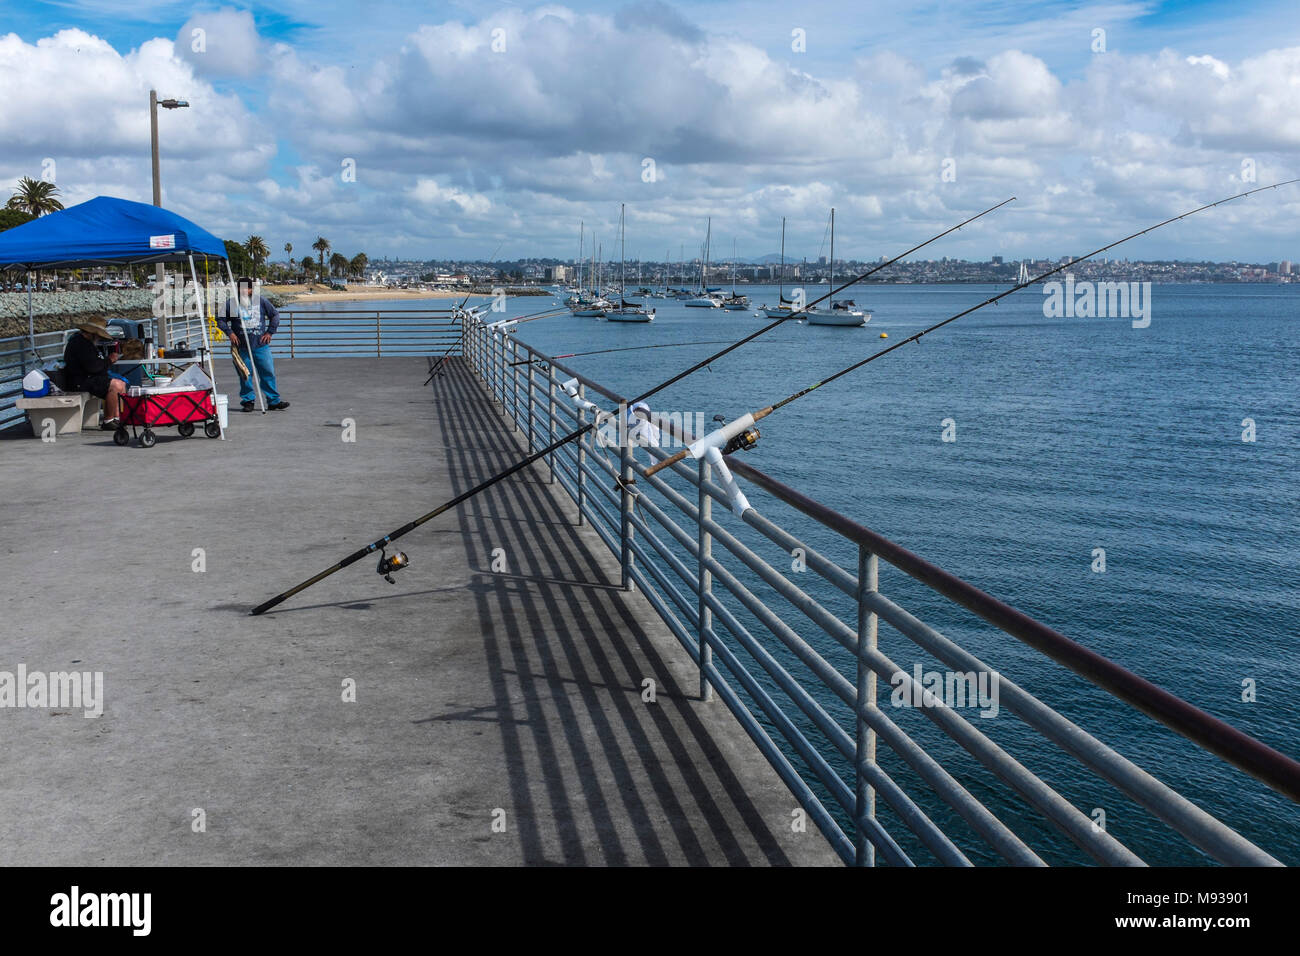 SAN DIEGO, CALIFORNIA, USA - Fishing rods on the pier at Shelter Island in San Diego. Stock Photo